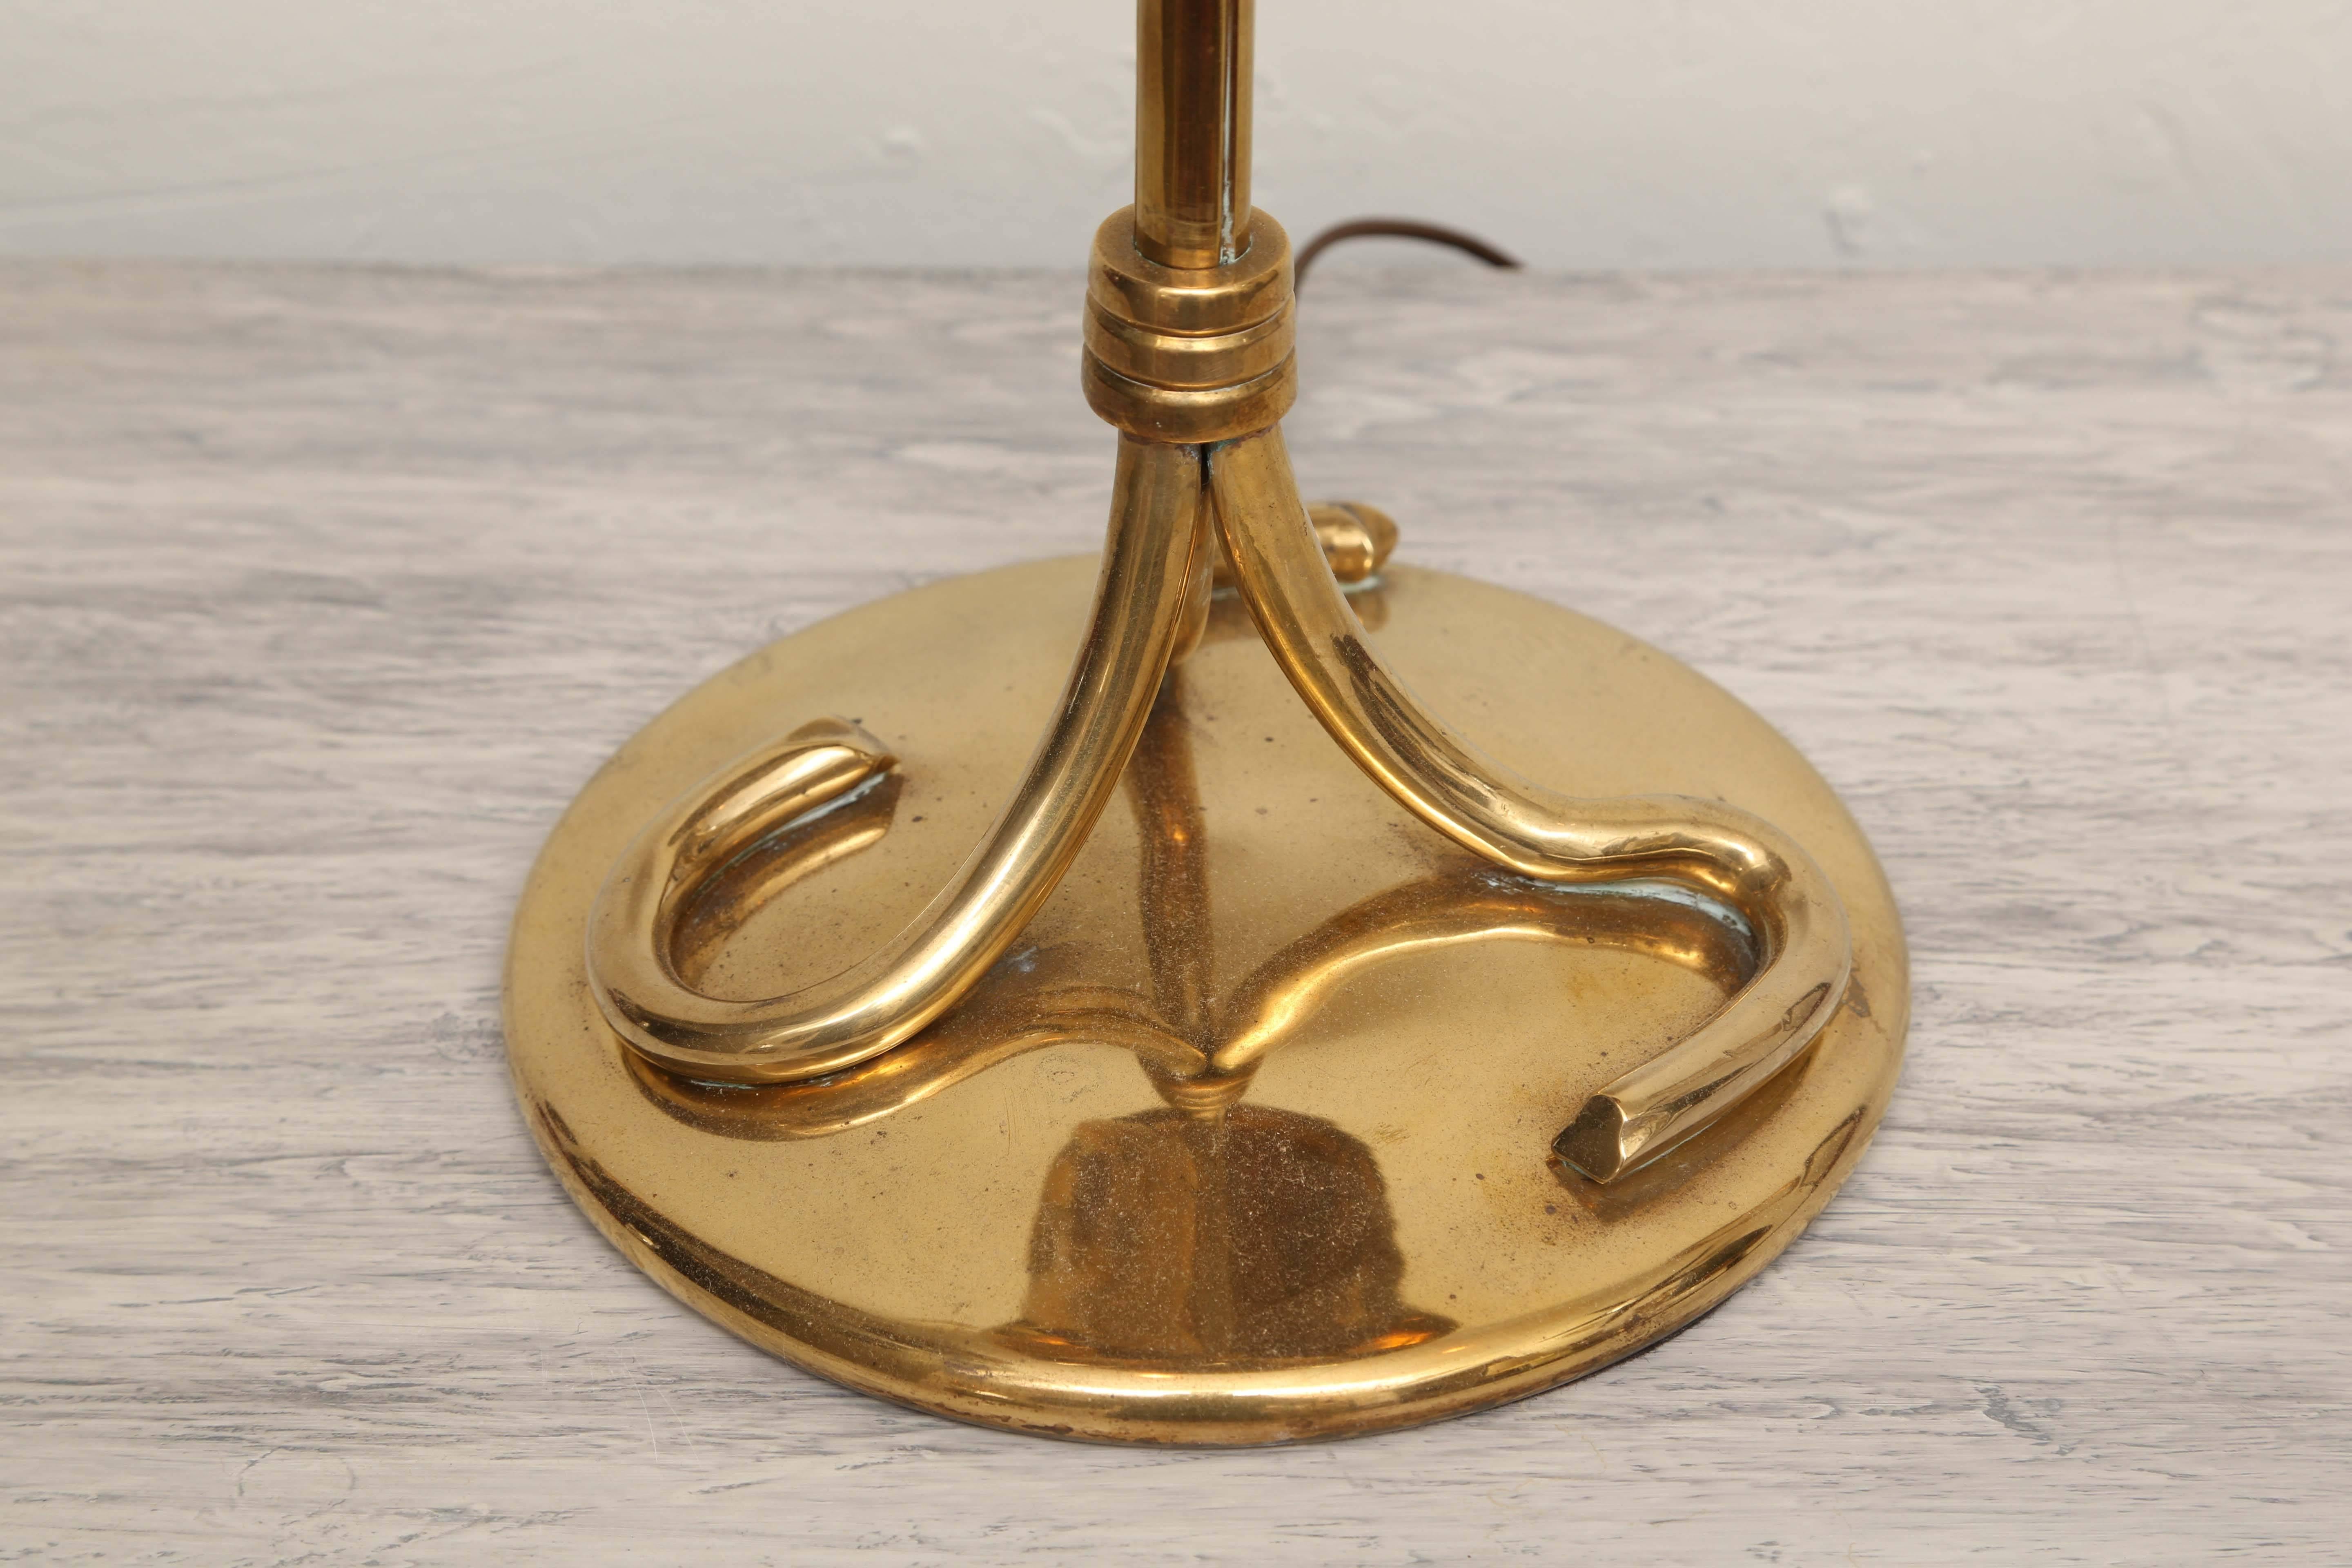 Very striking and unusual brass table lamp with brass leaves supporting a black tole shade and an outstanding finial.